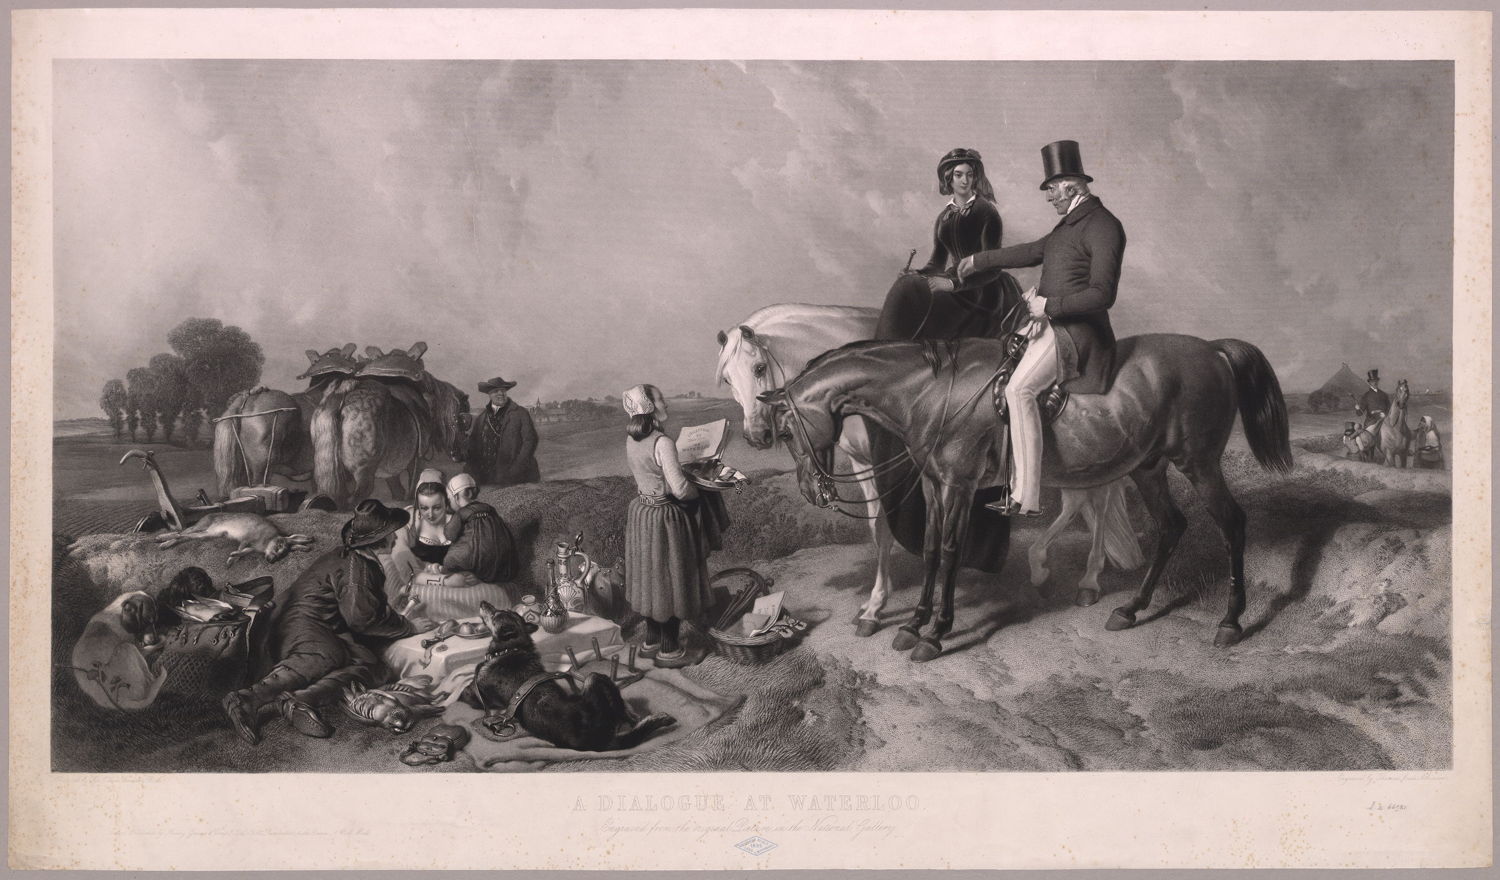 'A Dialogue at Waterloo', engraved by Thomas-Lewis Atkinson, after the original painting by Sir Edwin Henry Landseer
© Royal Library of Belgium